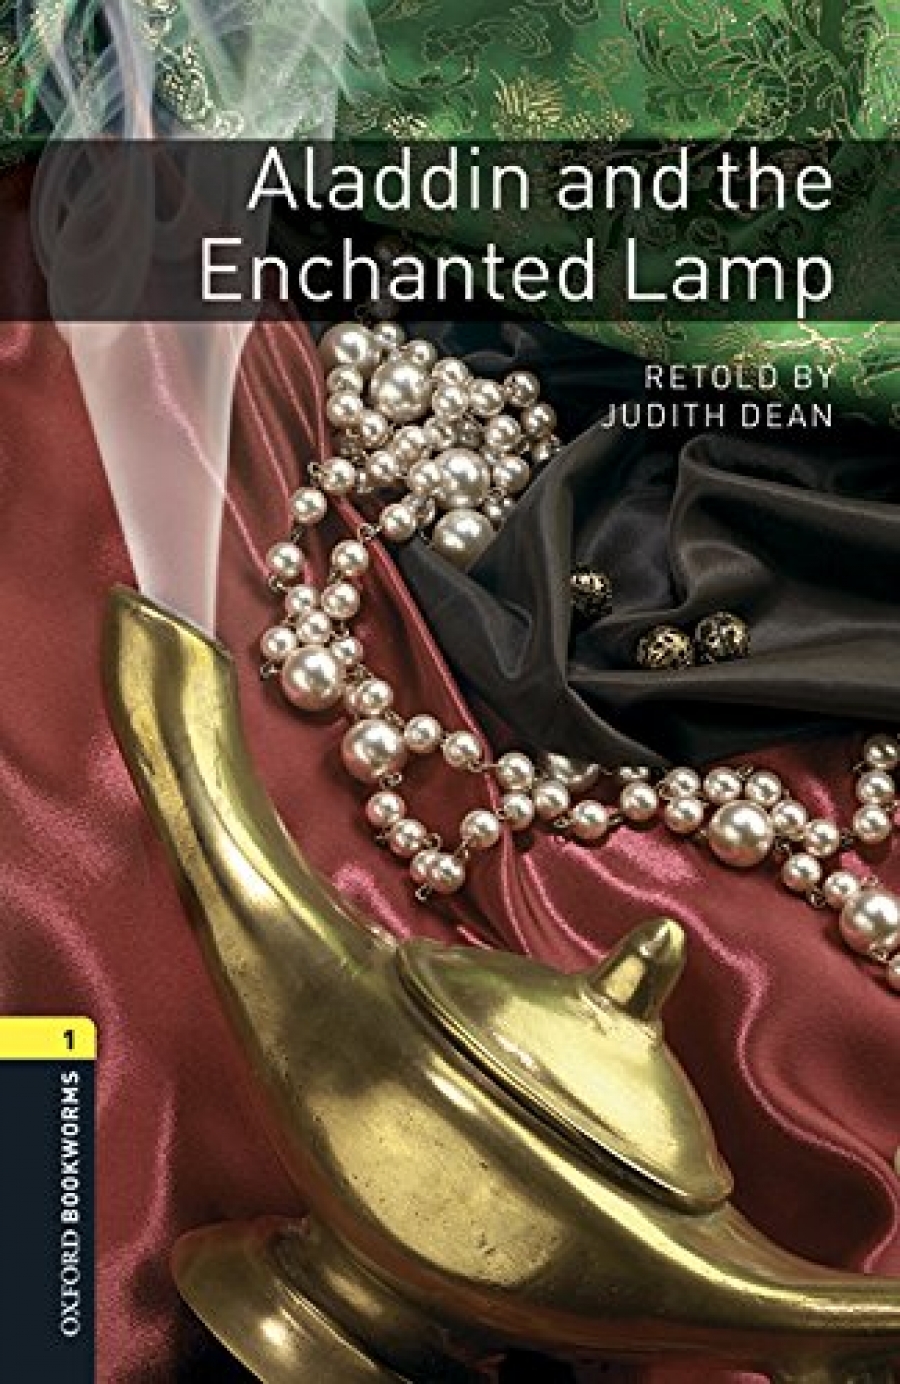 Retold by Judith Dean Aladdin and the Enchanted Lamp 